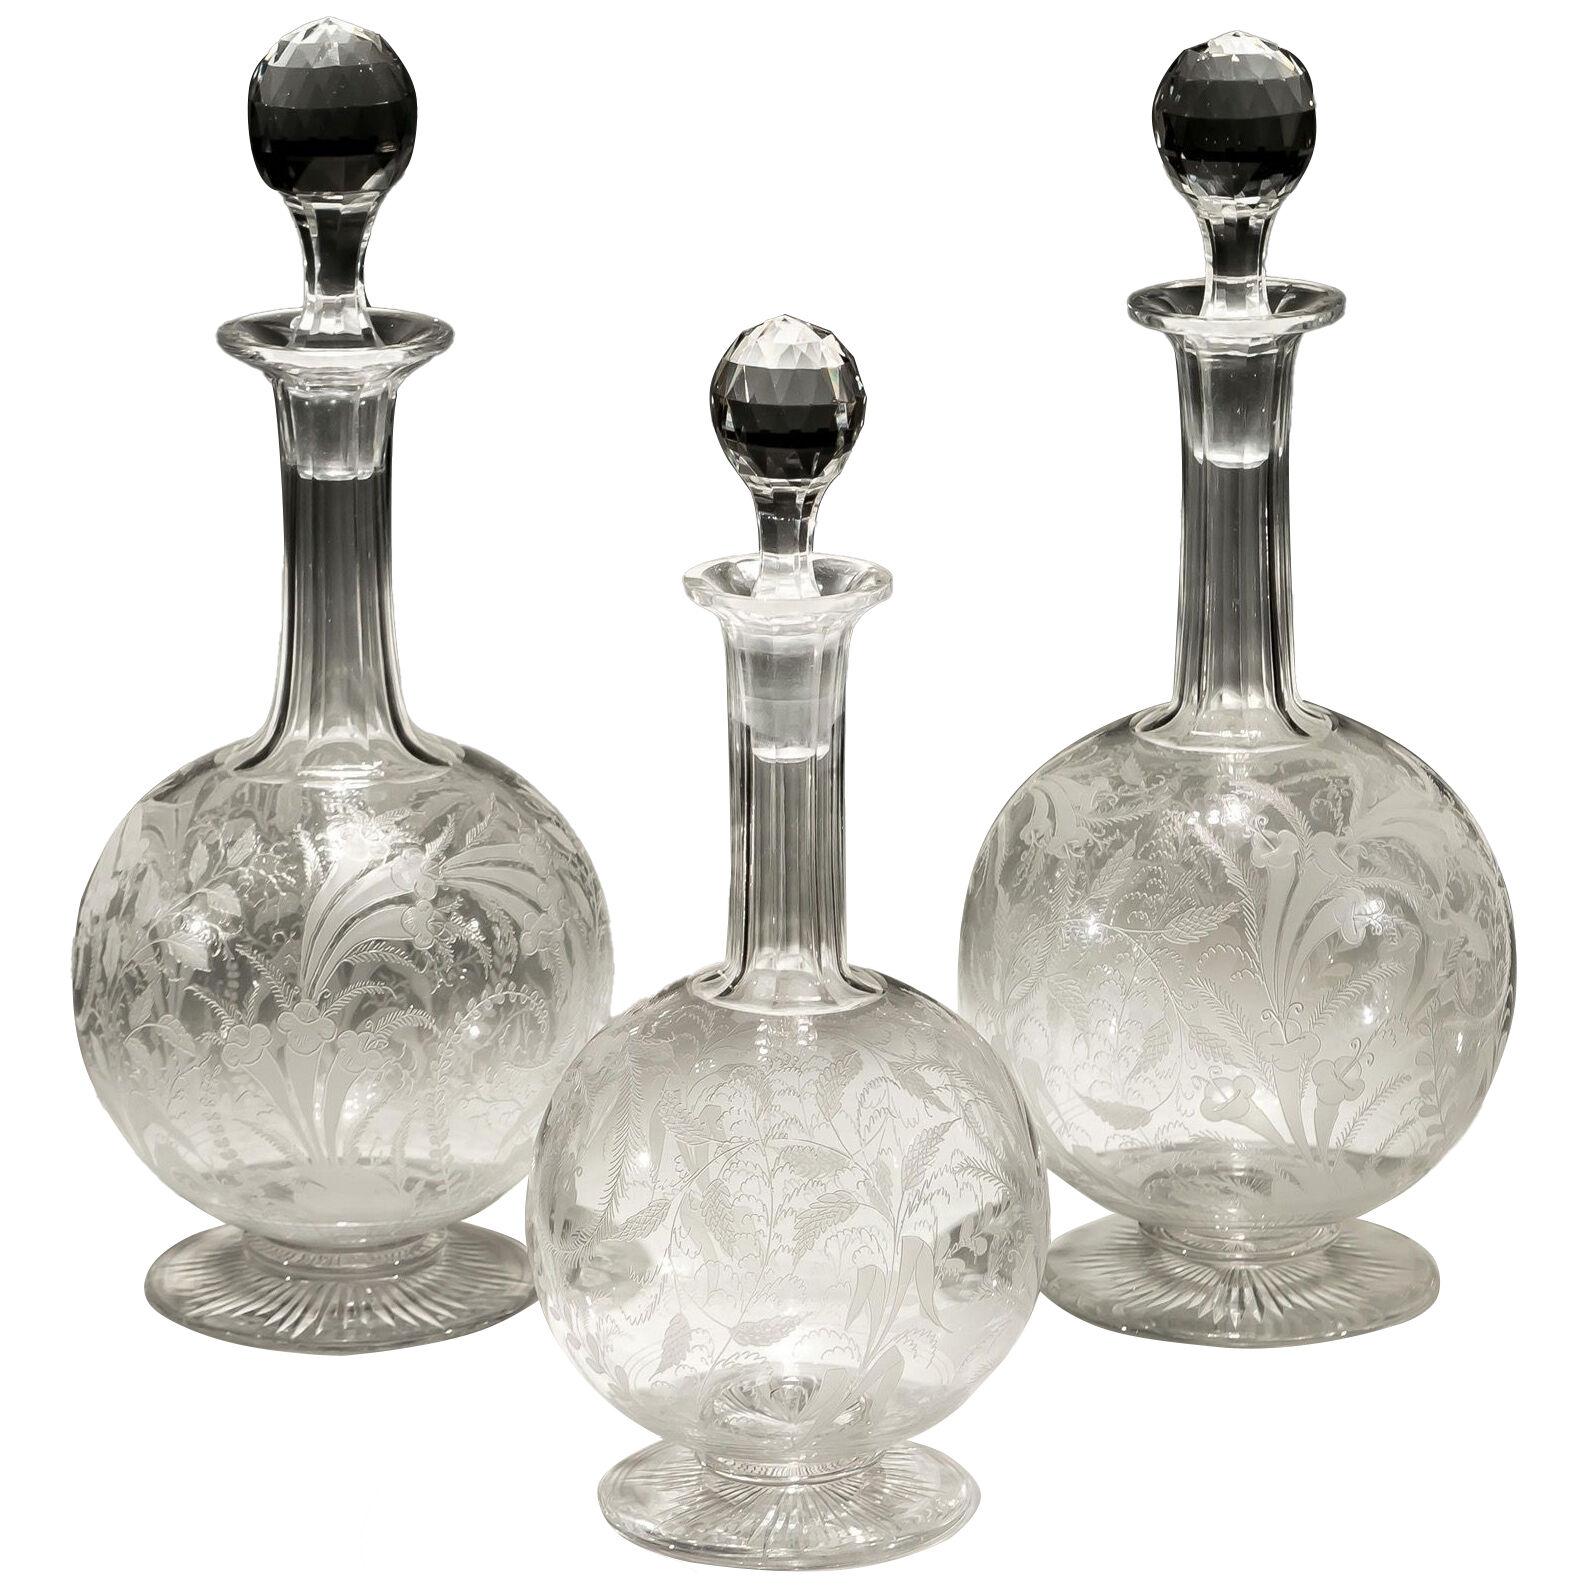 A SUITE OF FINALLY ENGRAVED DECANTERS